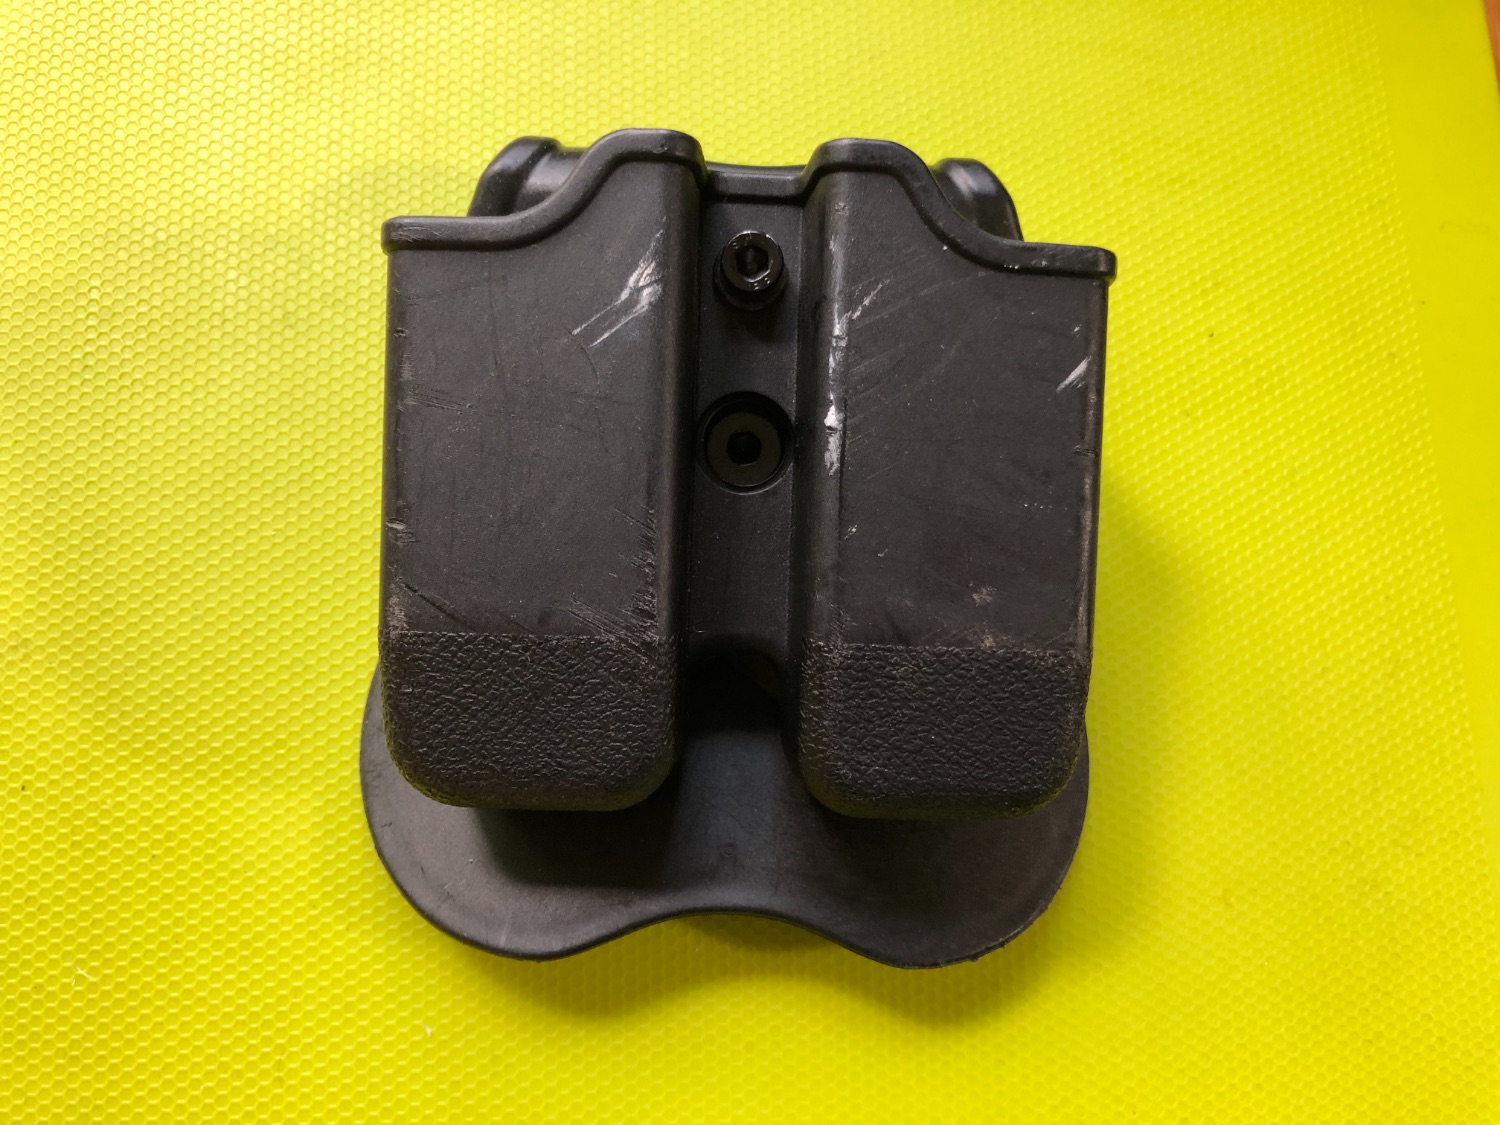 Holsters, Speed Loaders and Boxes - Gear - Airsoft Forums UK